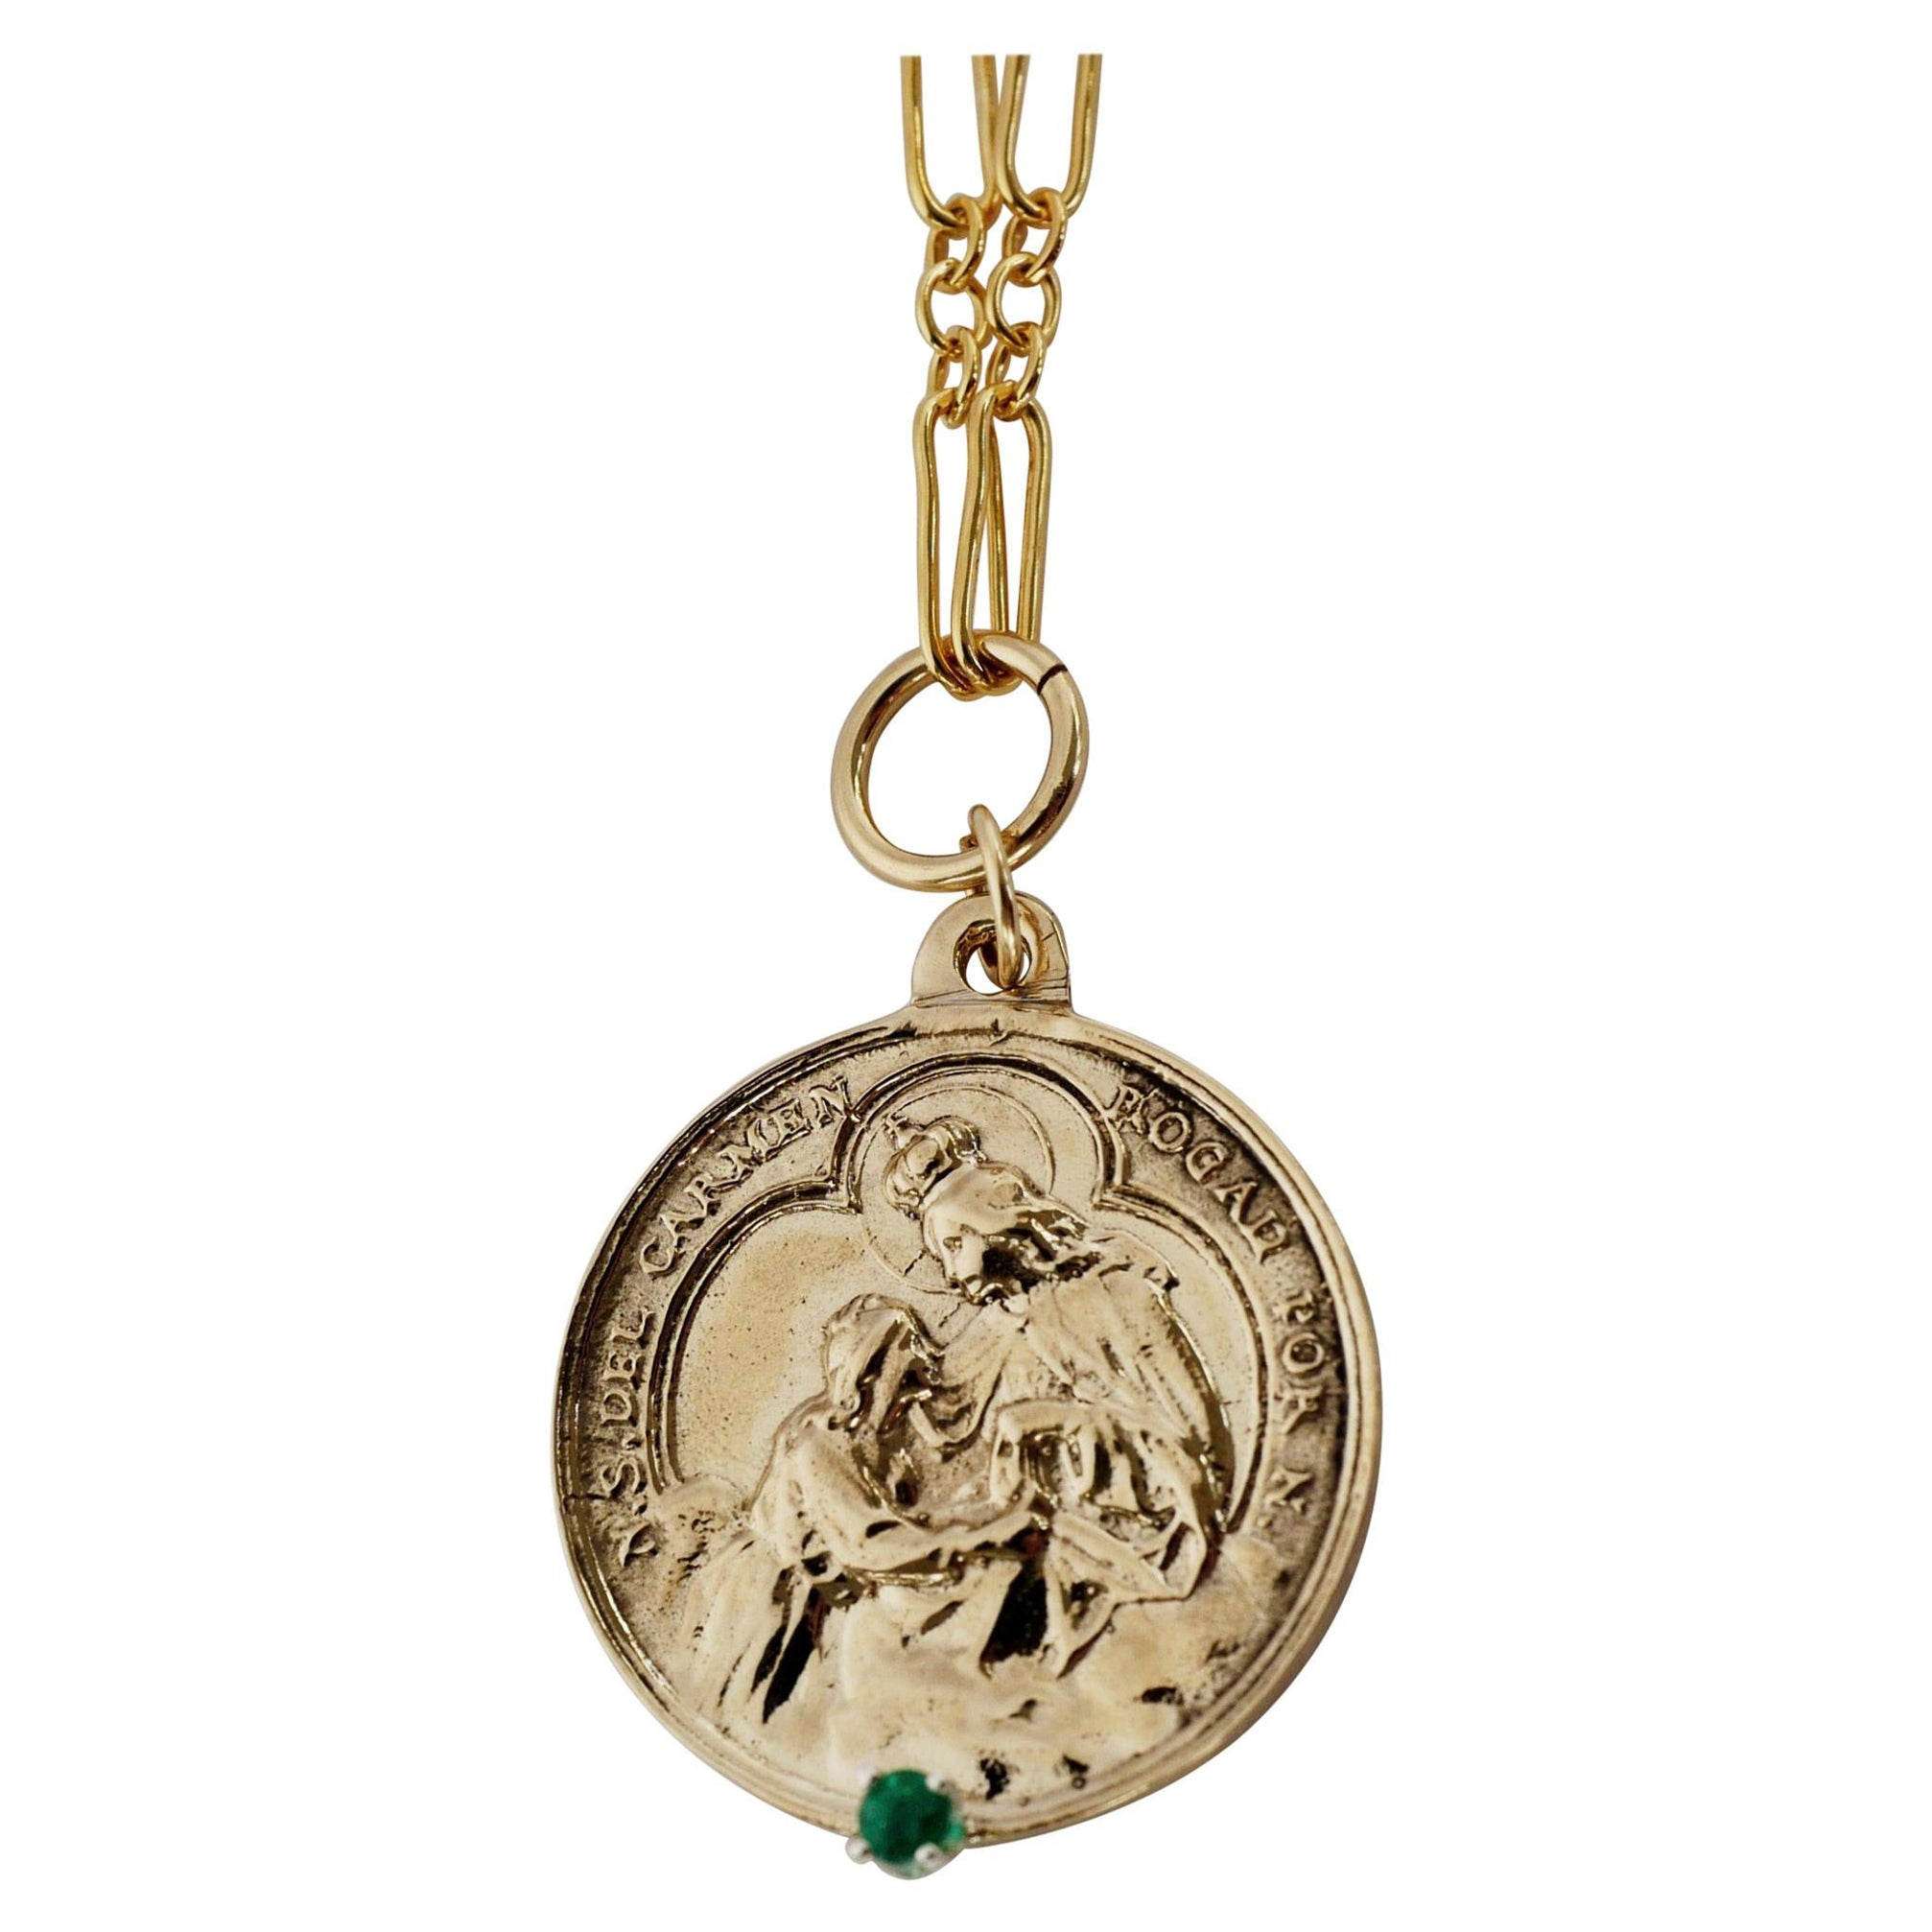 Emerald Virgin Mother Mary Medal Chunky Chain Necklace Gold tone J Dauphin For Sale